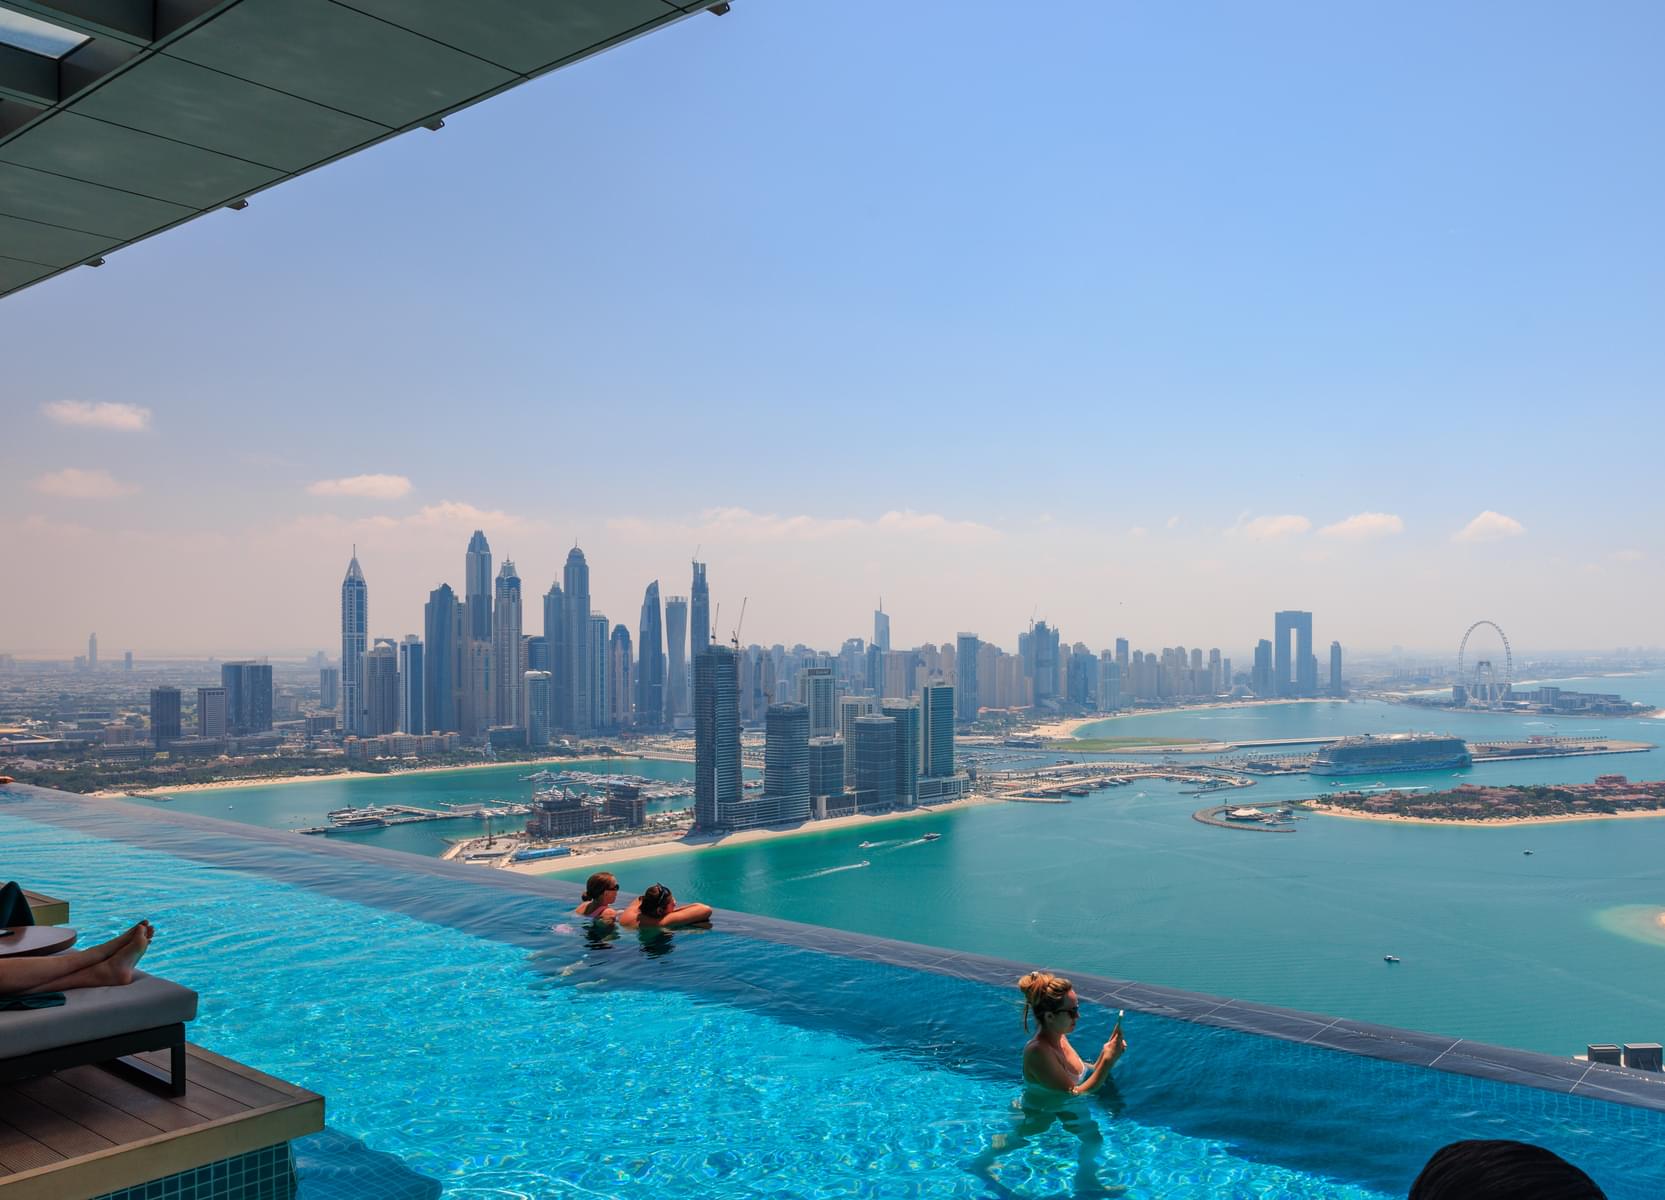 Tips for visiting Aura Skypool 